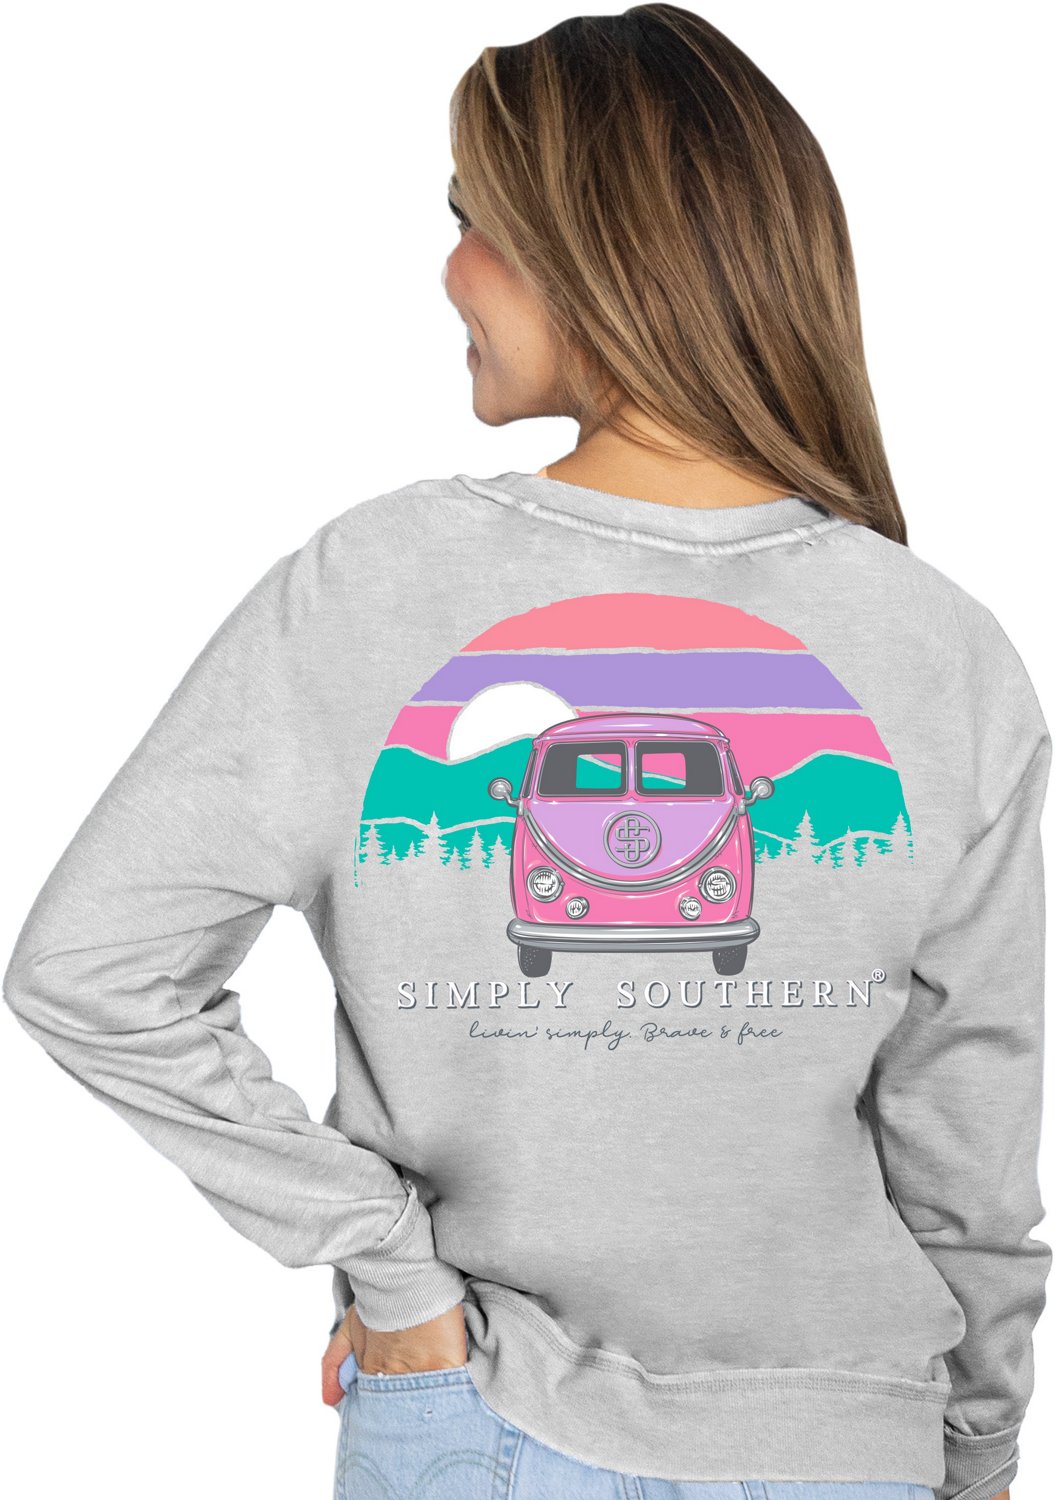 Simply Southern Women's Live Brave And Free Bus Fleece Crew Sweatshirt                                                           - view number 1 selected